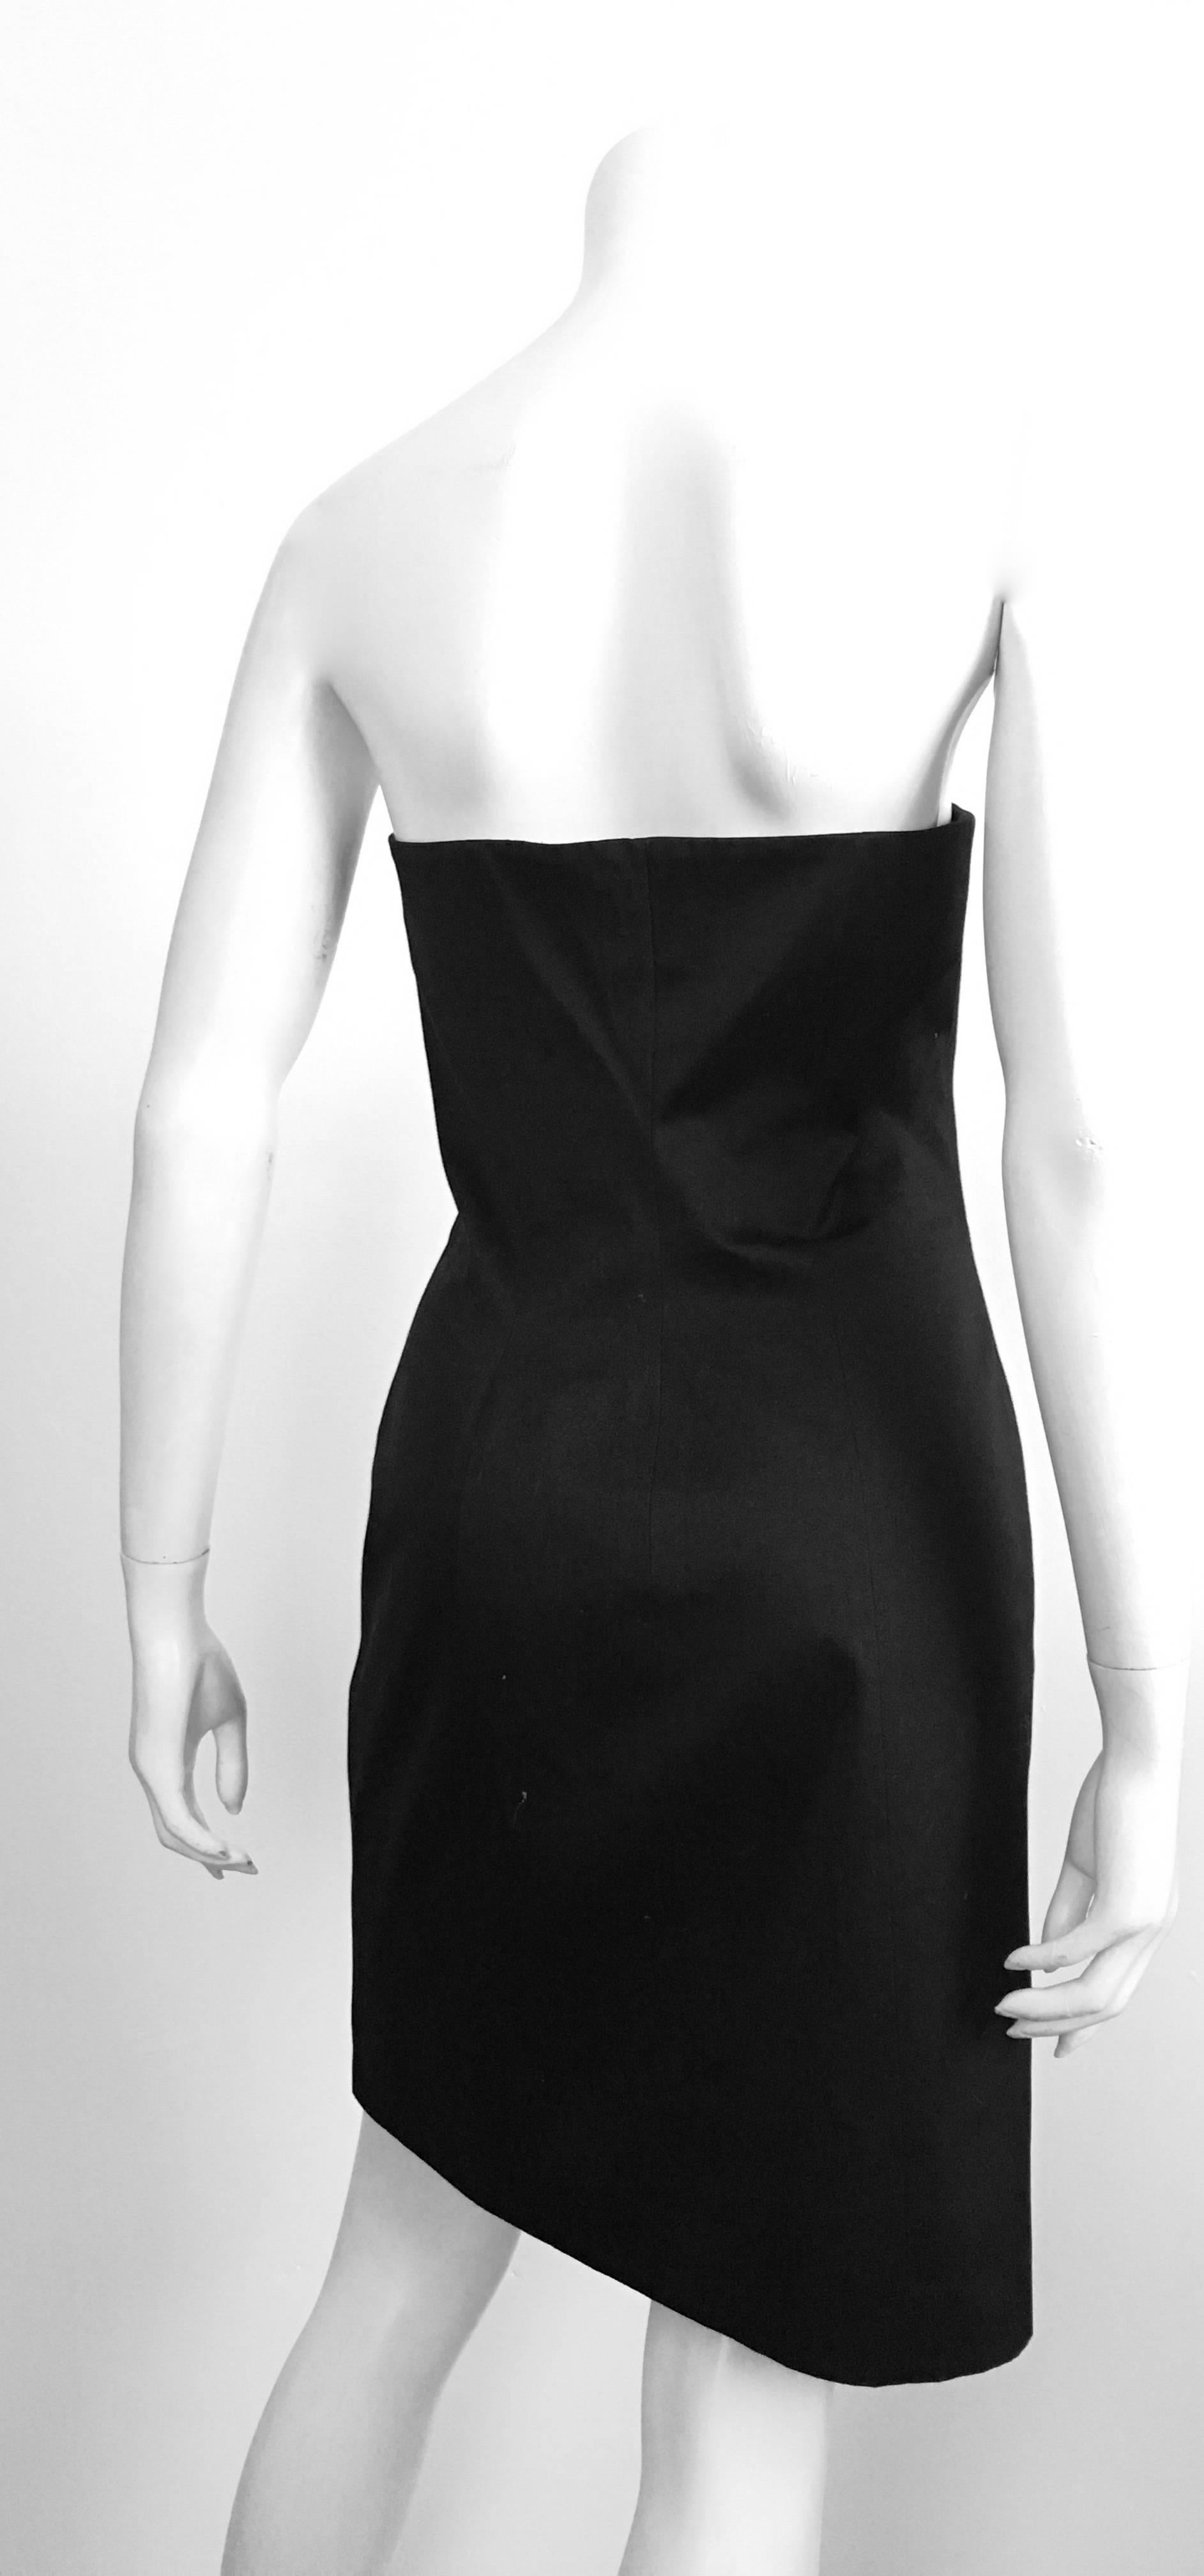 Women's or Men's Michael Kors Strapless Cotton Black Cocktail Dress Size 4 / 6. Made in Italy. For Sale